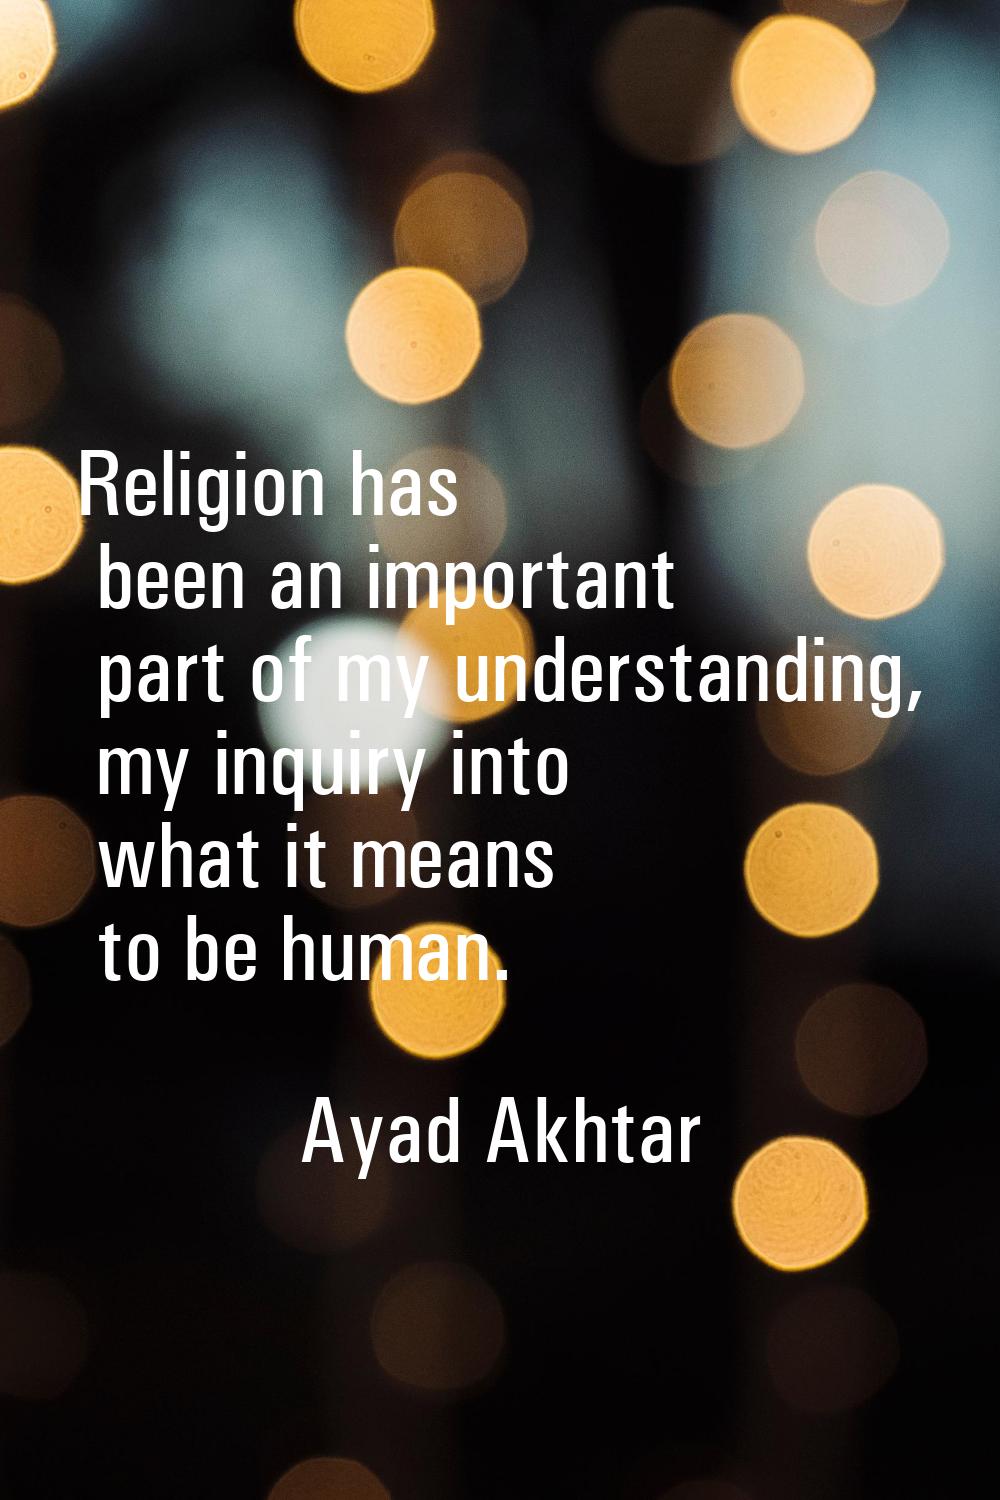 Religion has been an important part of my understanding, my inquiry into what it means to be human.